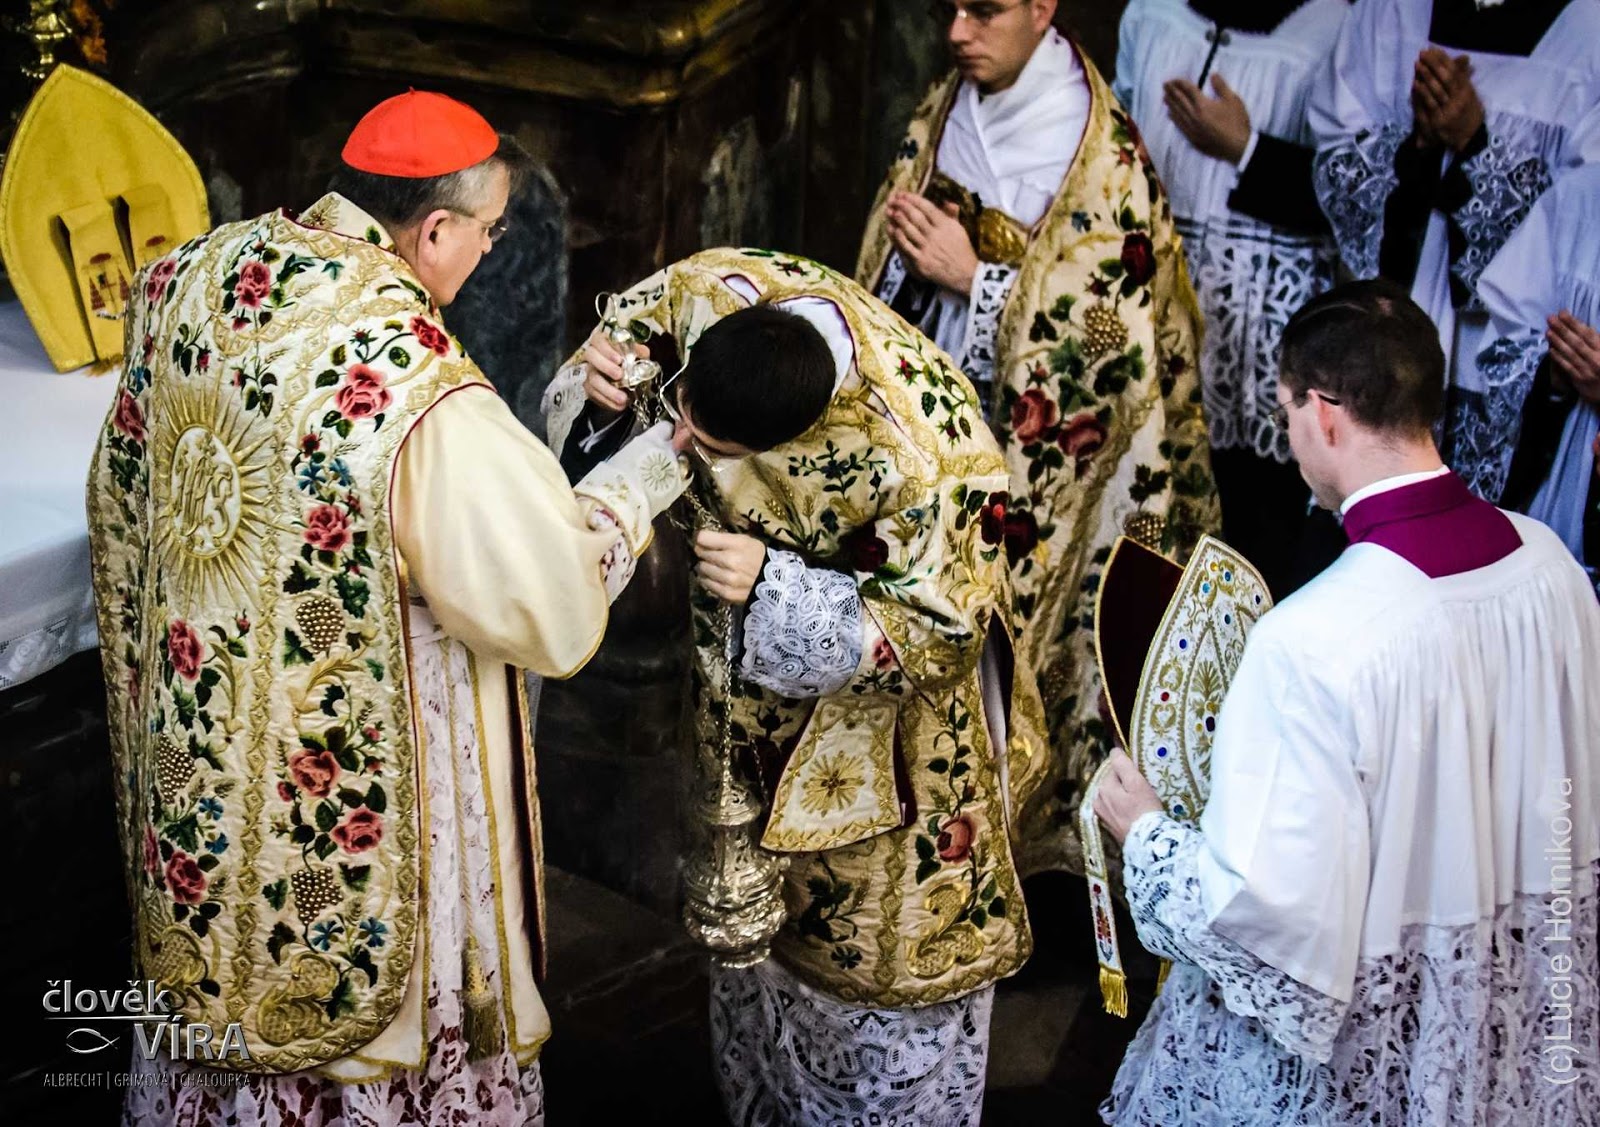 New Liturgical Movement: On the Origins of the Devotion to, and